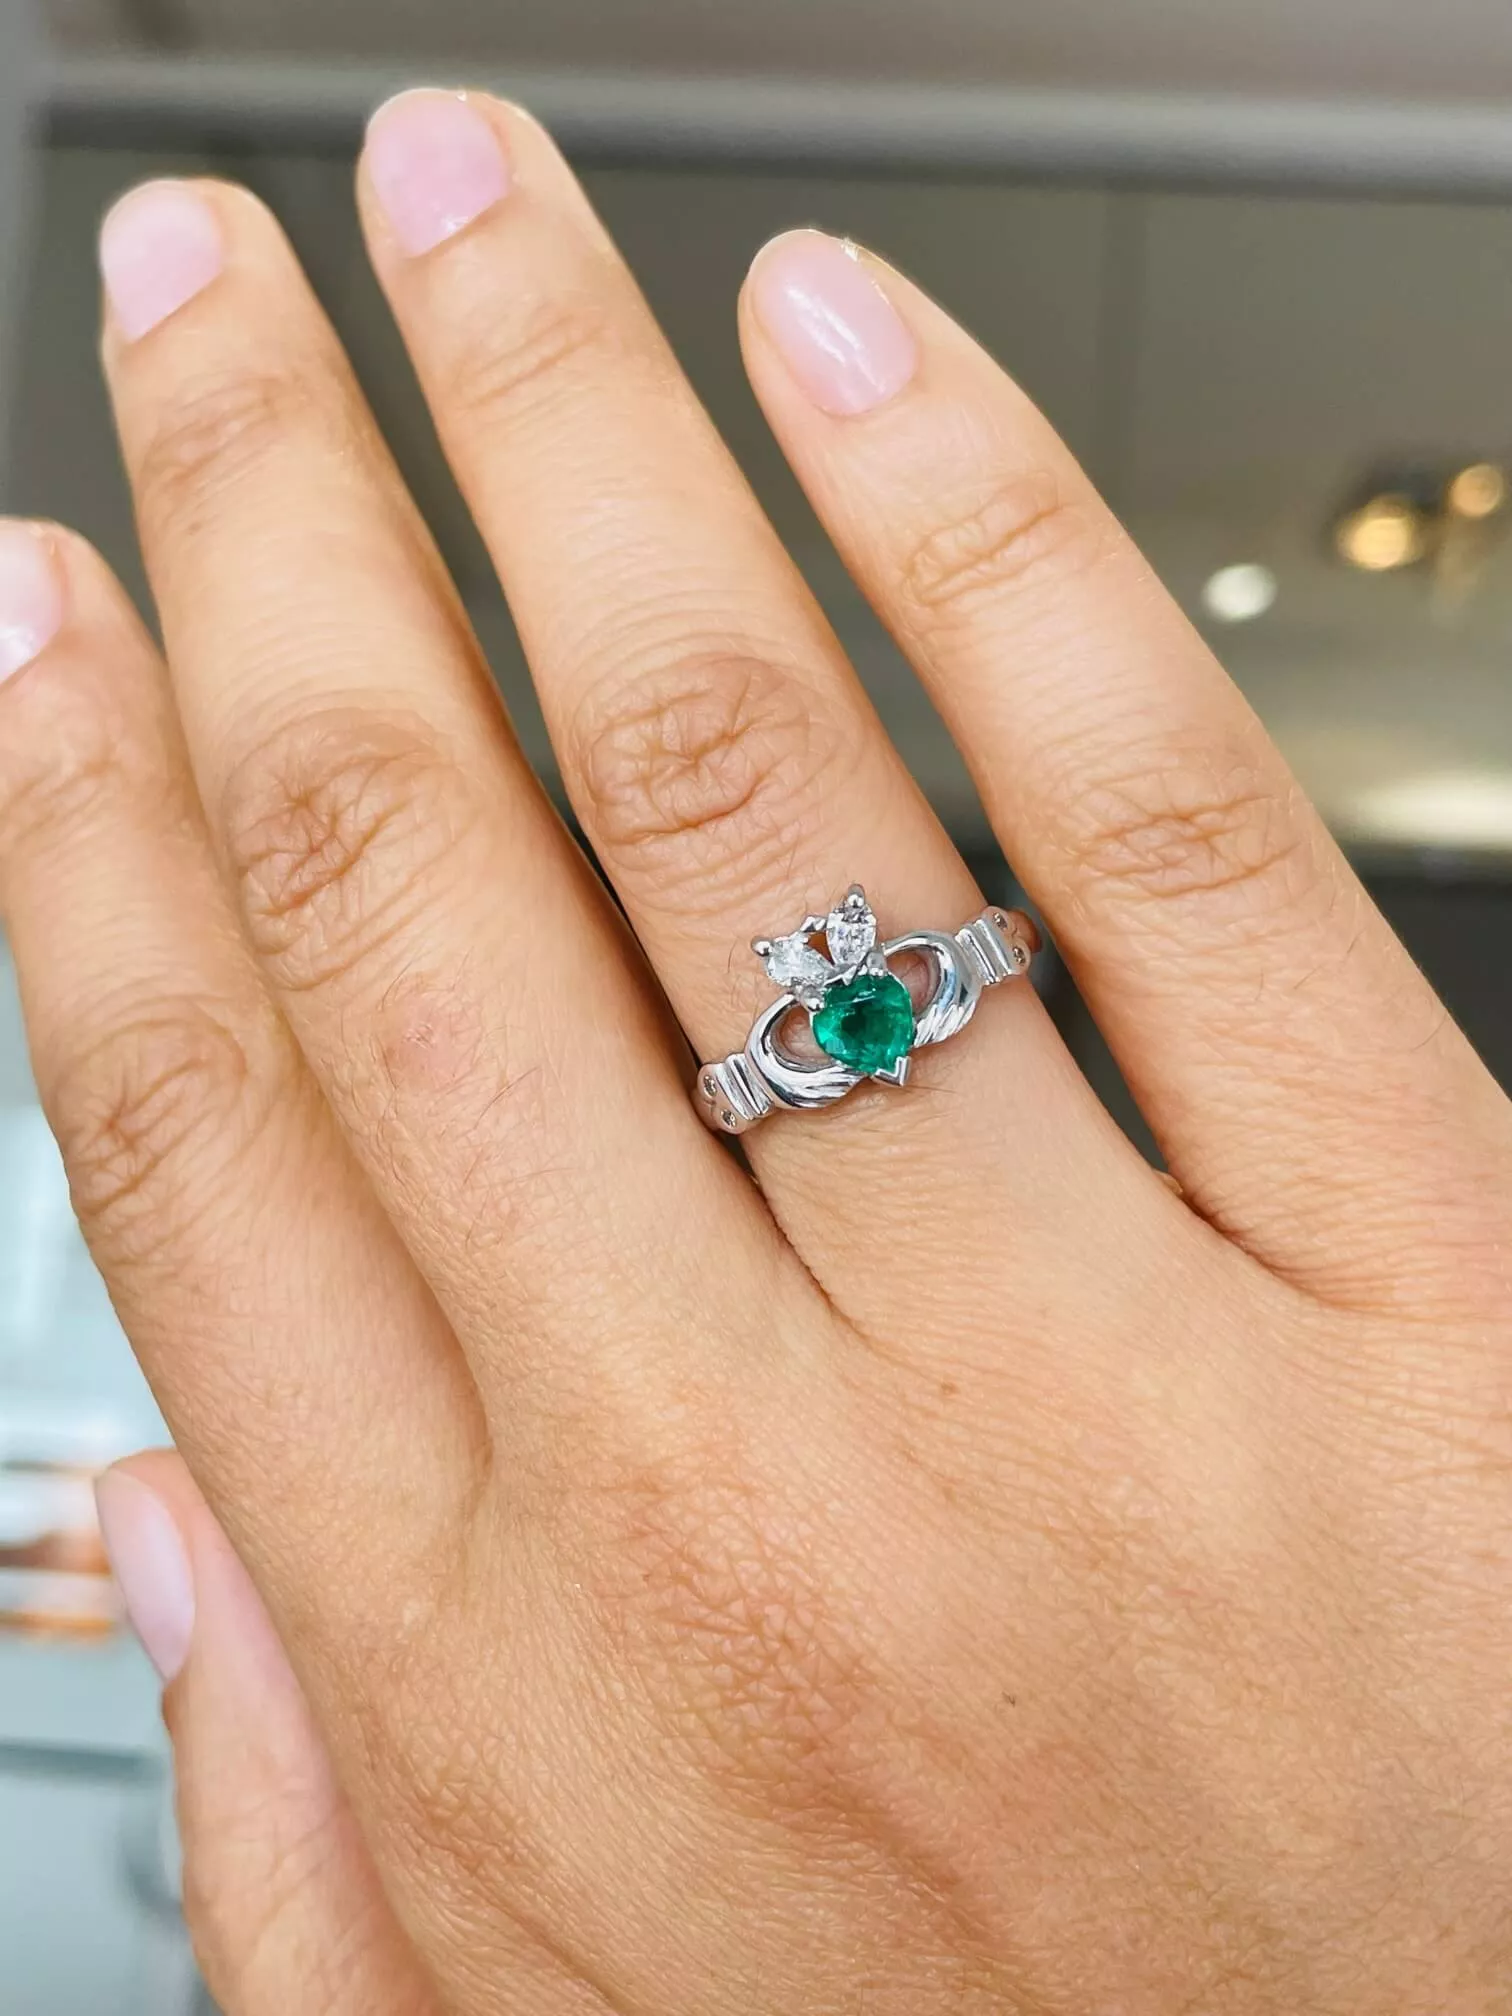 14k White Gold Emerald And Diamond Claddagh Engagement Ring 2 2